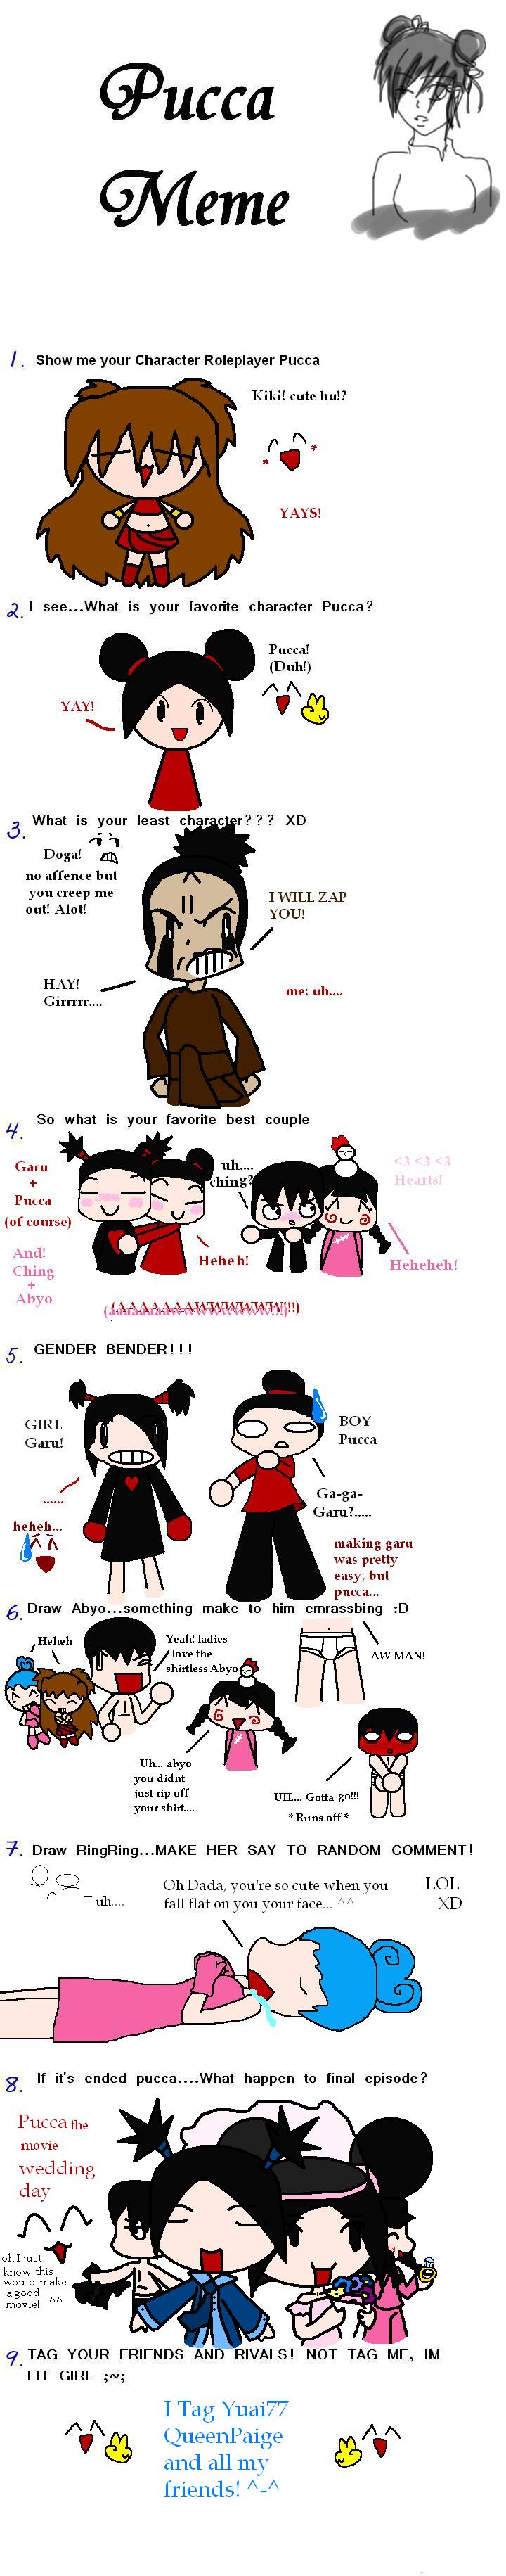 Pucca meme by poppixie101